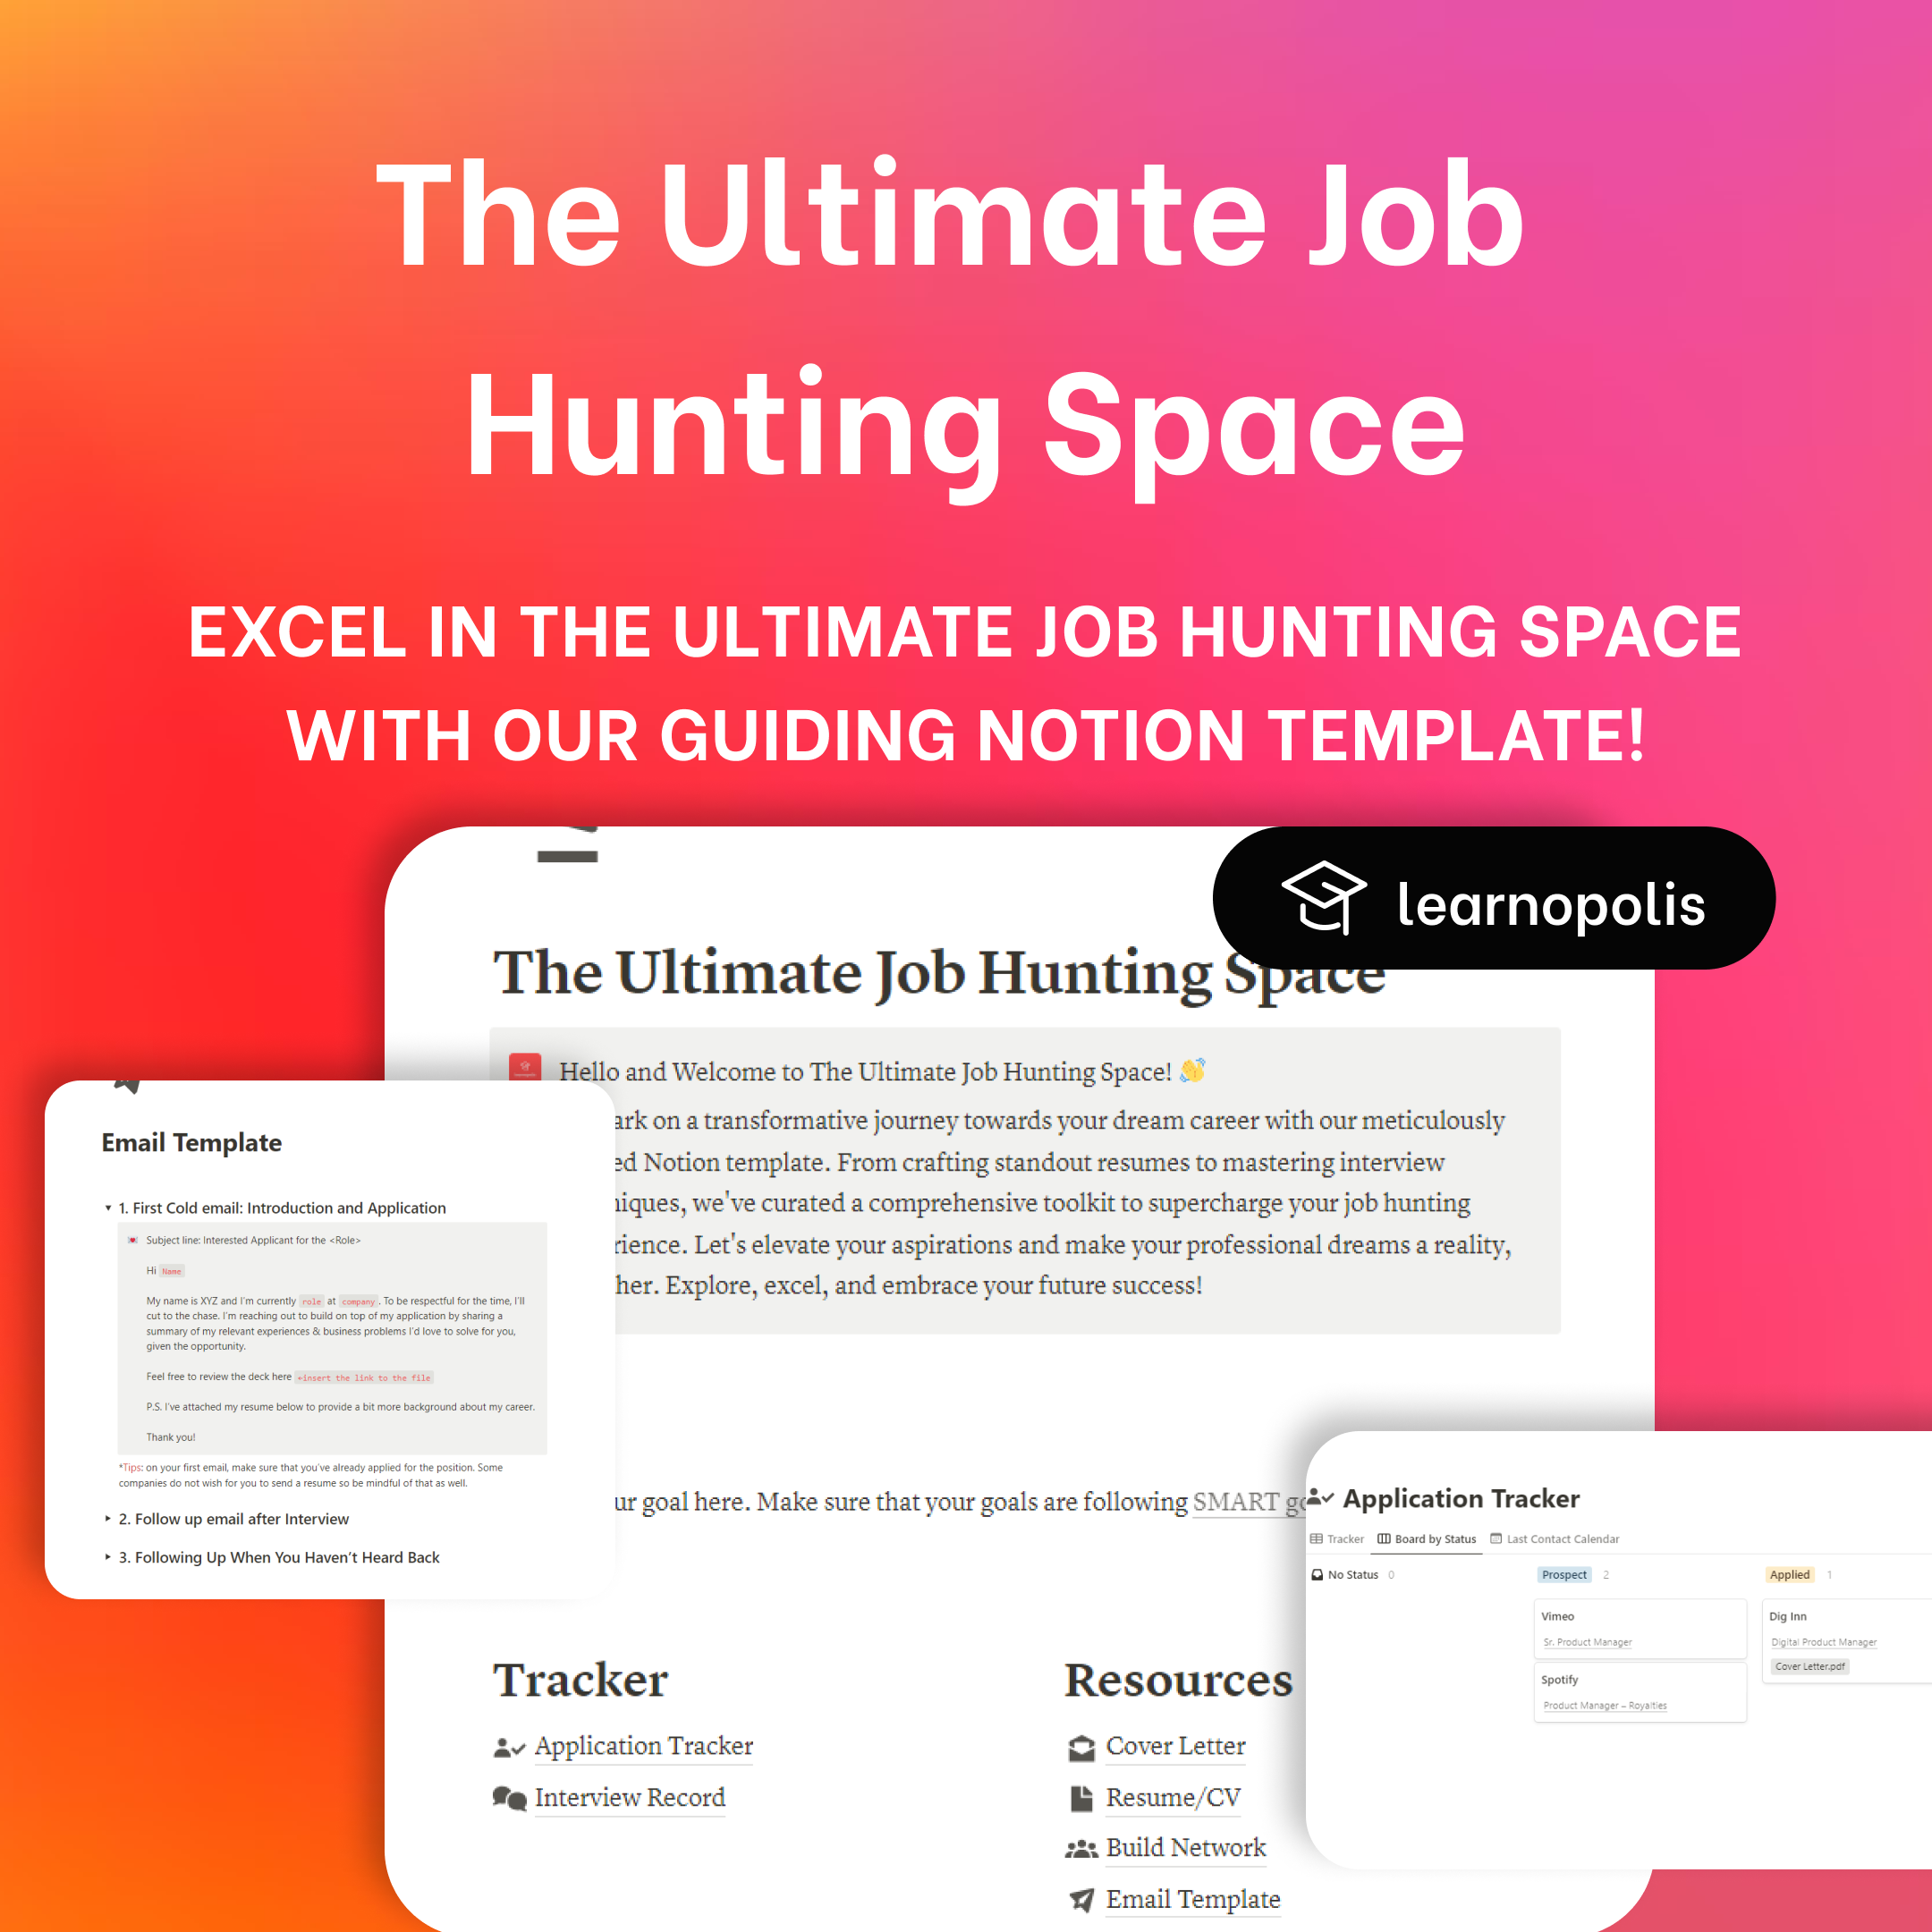 The Ultimate Job Hunting Space logo